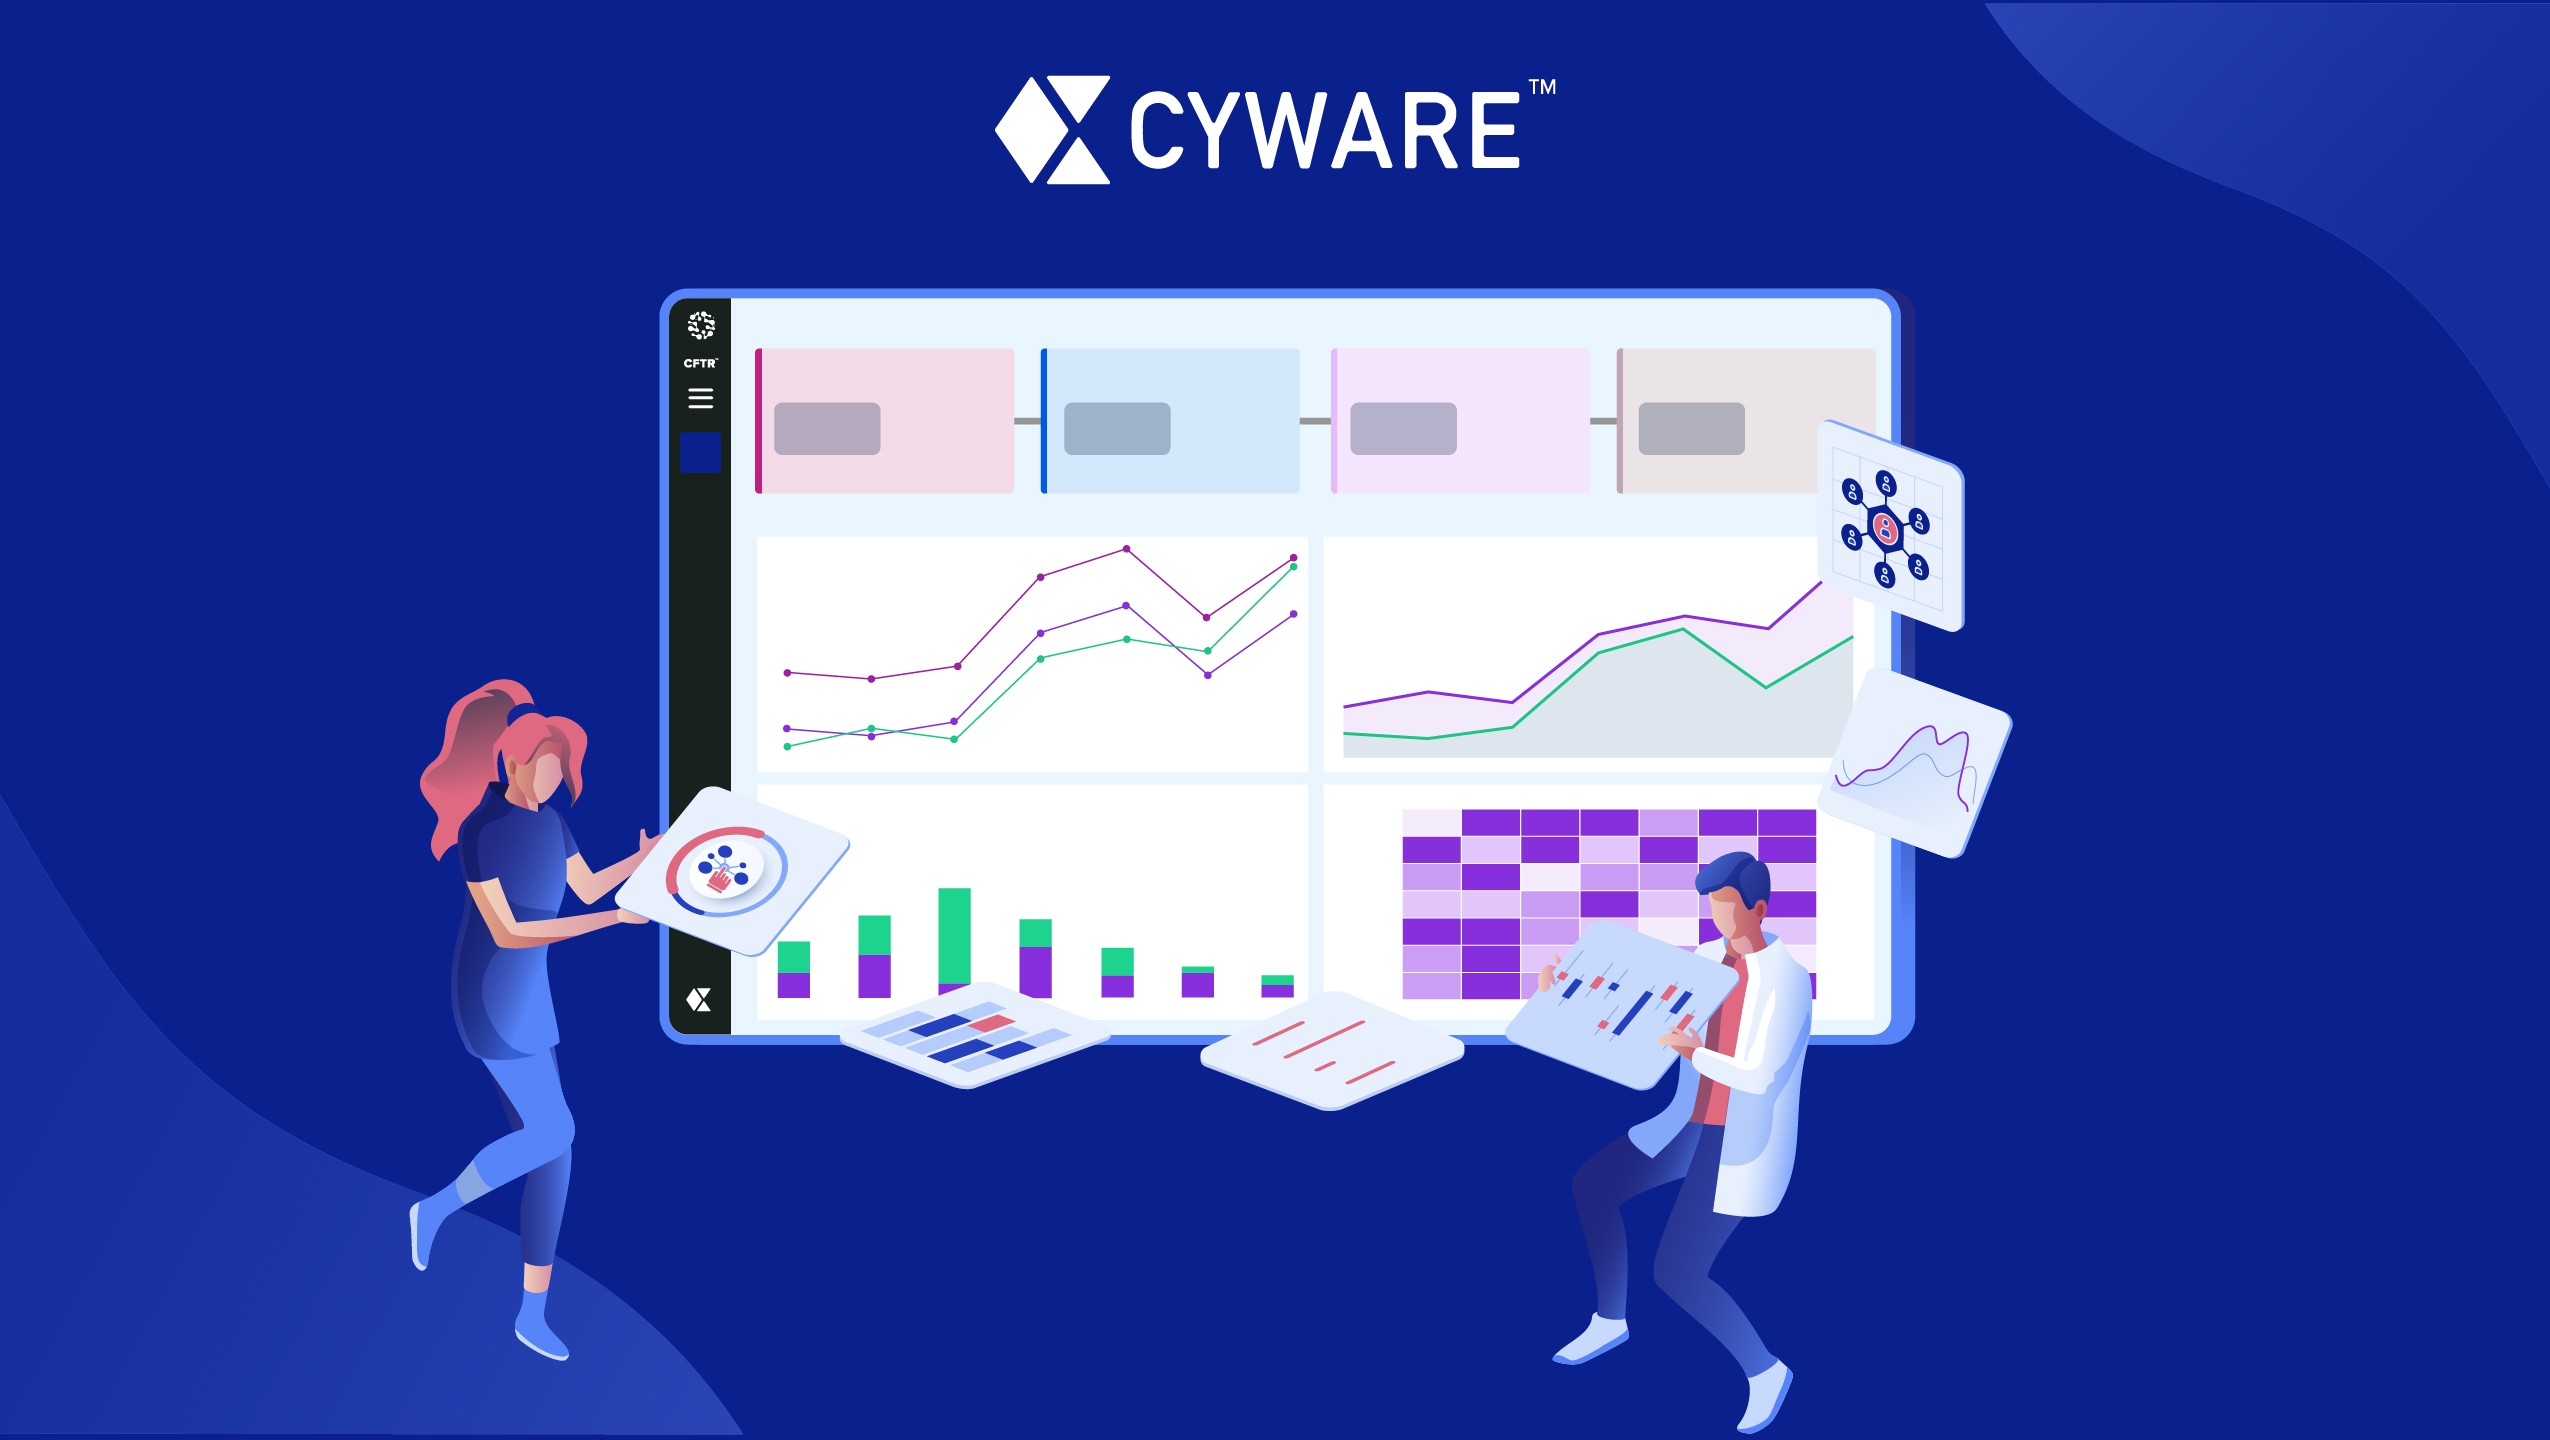 Cyware’s New Multi-Tenancy Dashboard Enables MSSPs to Gain Threat Visibility Across Customer Environments